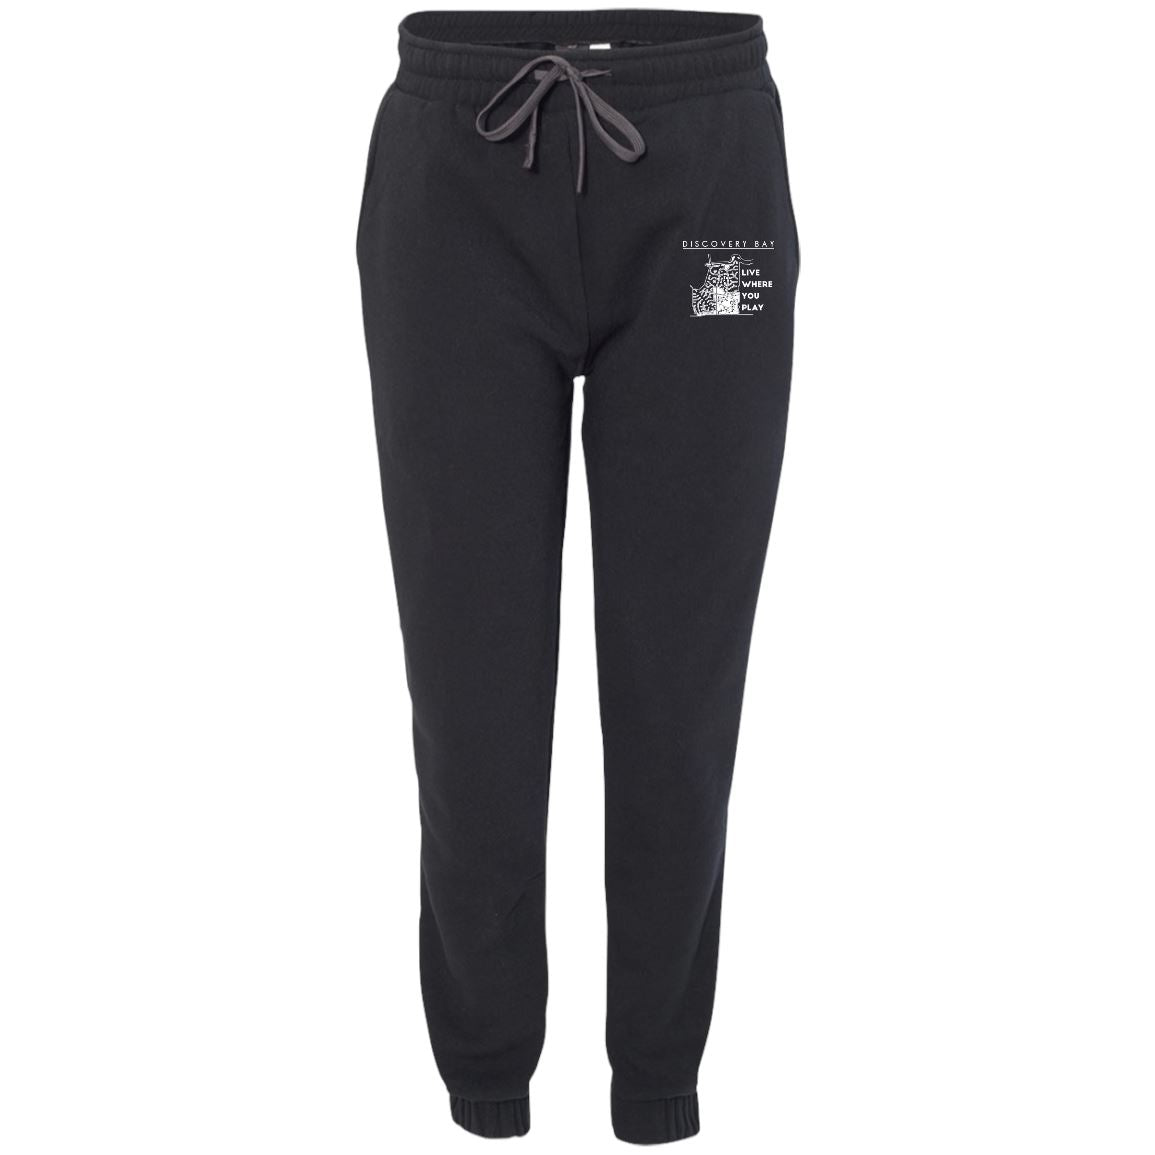 Discovery Bay Embroidered Men's Adult Fleece Joggers - Houseboat Kings